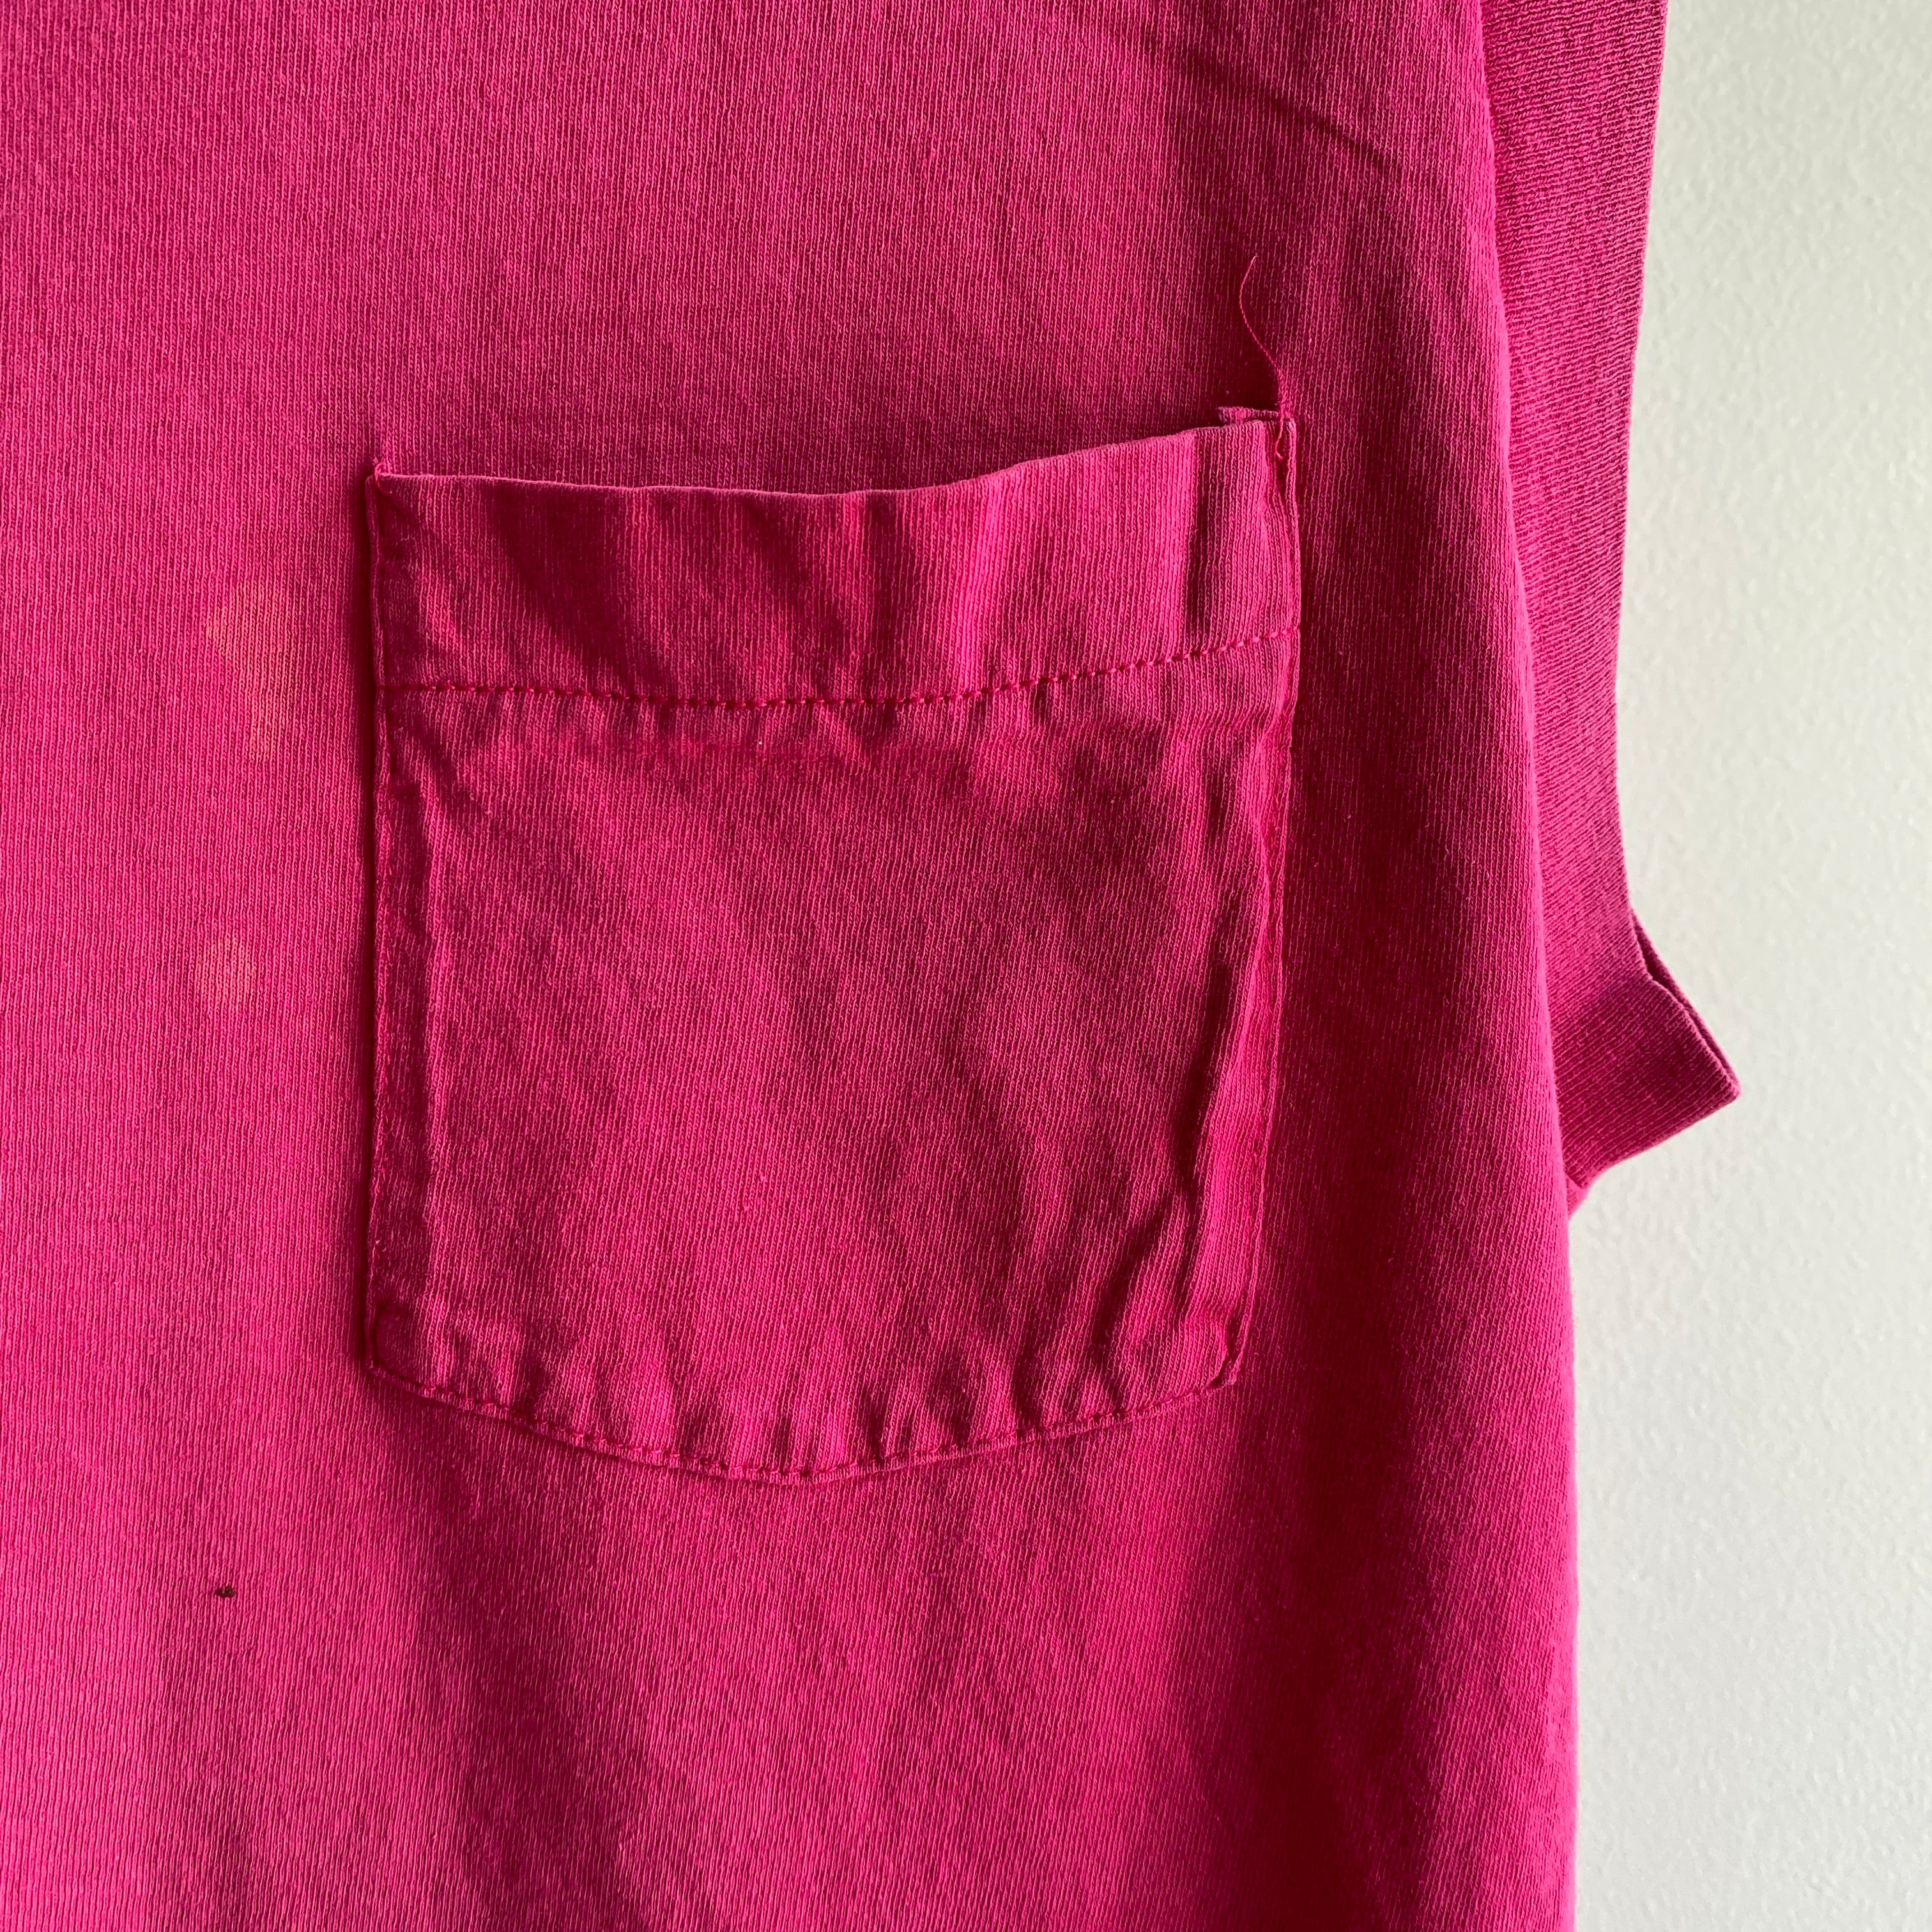 1980s Magenta Pink Muscle Tank with Pocket